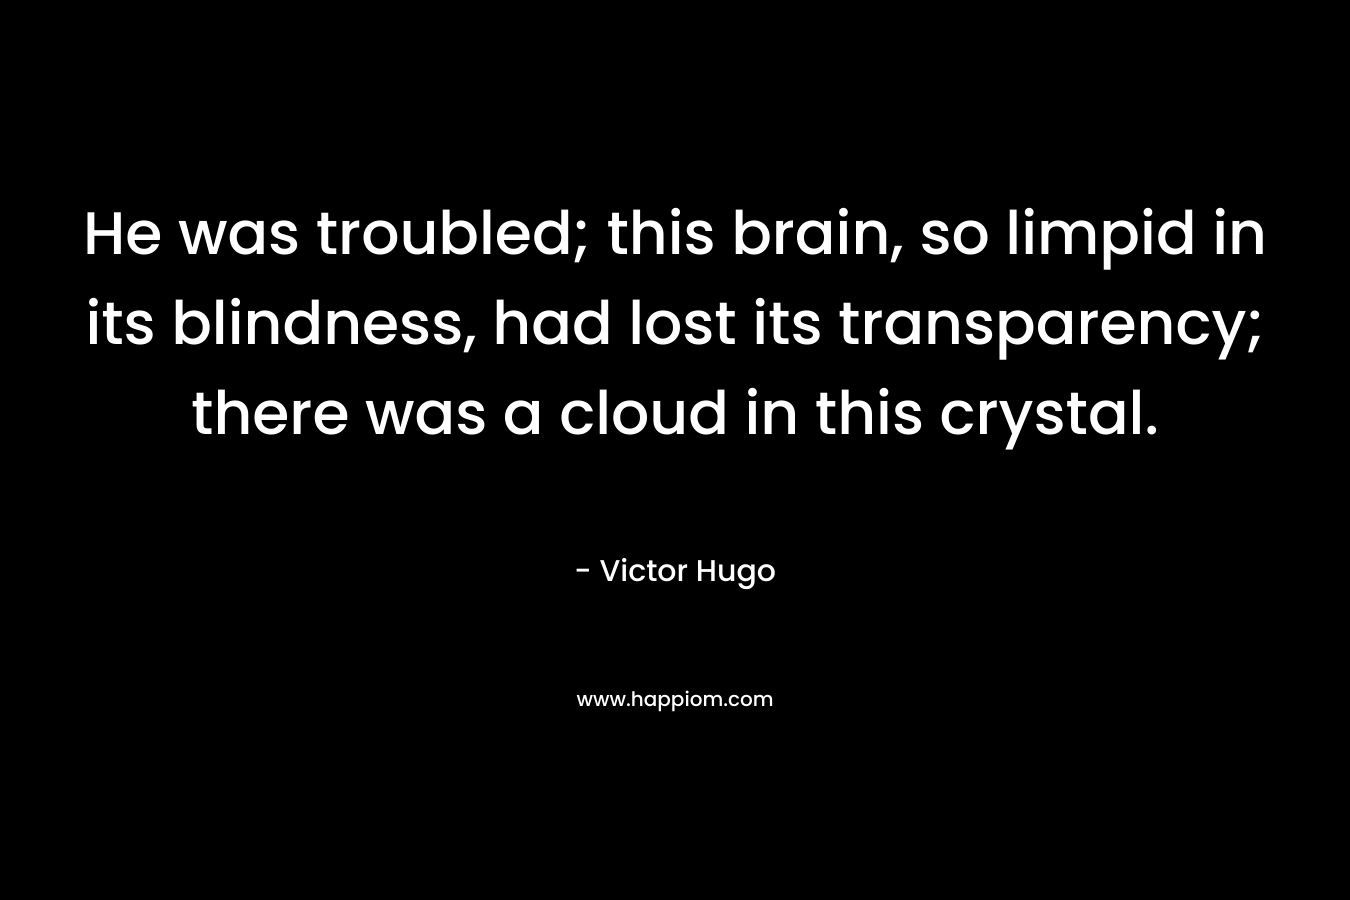 He was troubled; this brain, so limpid in its blindness, had lost its transparency; there was a cloud in this crystal. – Victor Hugo